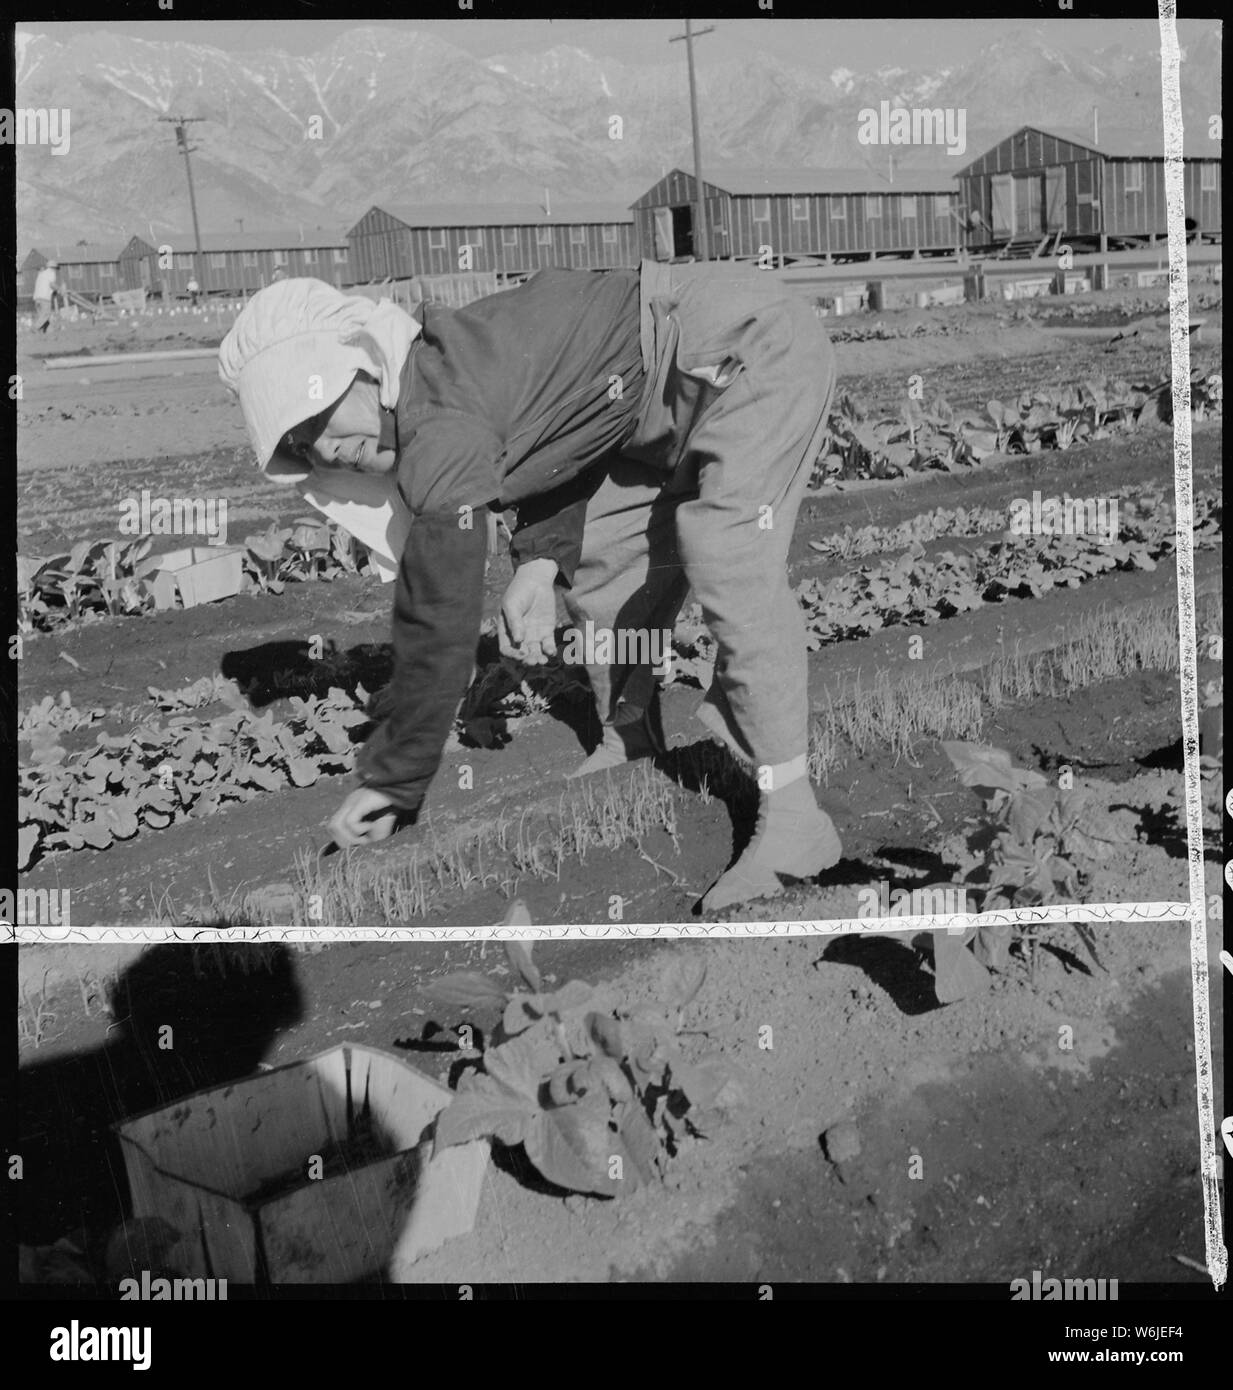 Manzanar Relocation Center, Manzanar, California. Evacuee in her hobby garden which rates highest . . .; Scope and content:  The full caption for this photograph reads: Manzanar Relocation Center, Manzanar, California. Evacuee in her hobby garden which rates highest of all the garden plots at this War Relocation Authority center. Vegetables for their own use are grown in plots 10 x 50 feet between barrack rows. Stock Photo